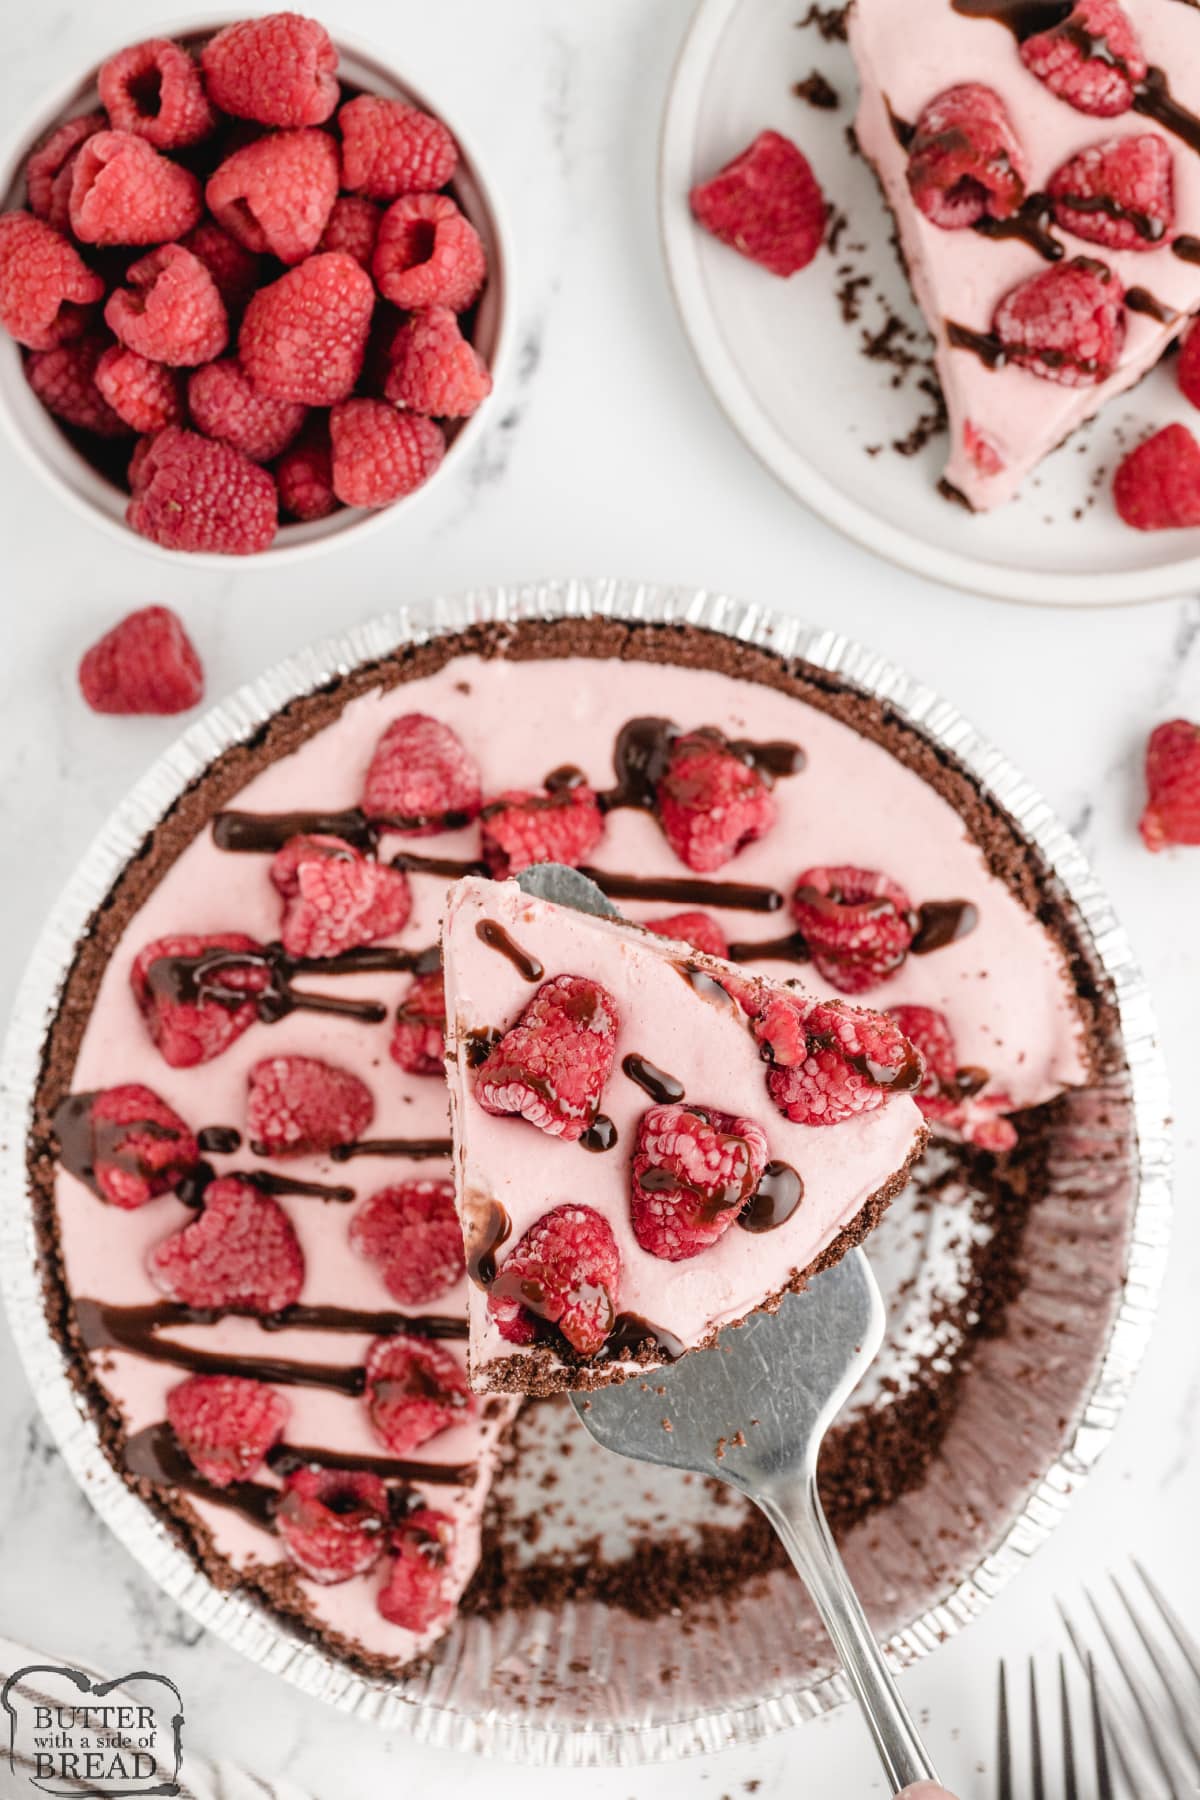 Raspberry pie made with fresh raspberries and whipping cream